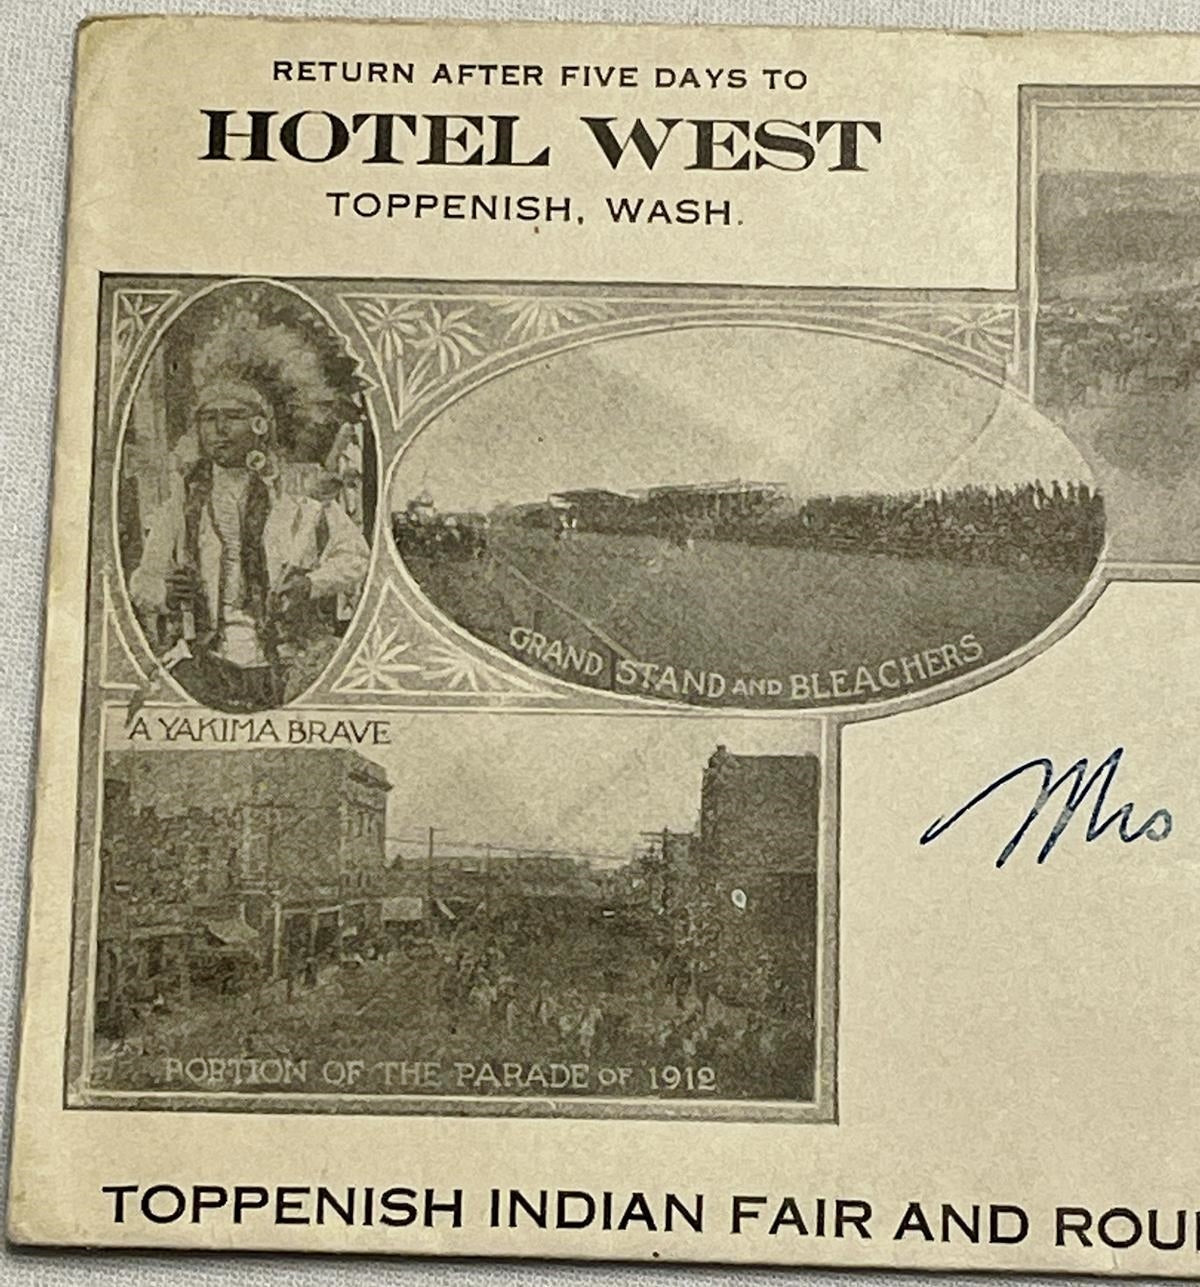 Antique 1913 Toppenish Indian Fair and Roundup September 1-7, 1913 Hotel West Advertising Postmarked Envelope